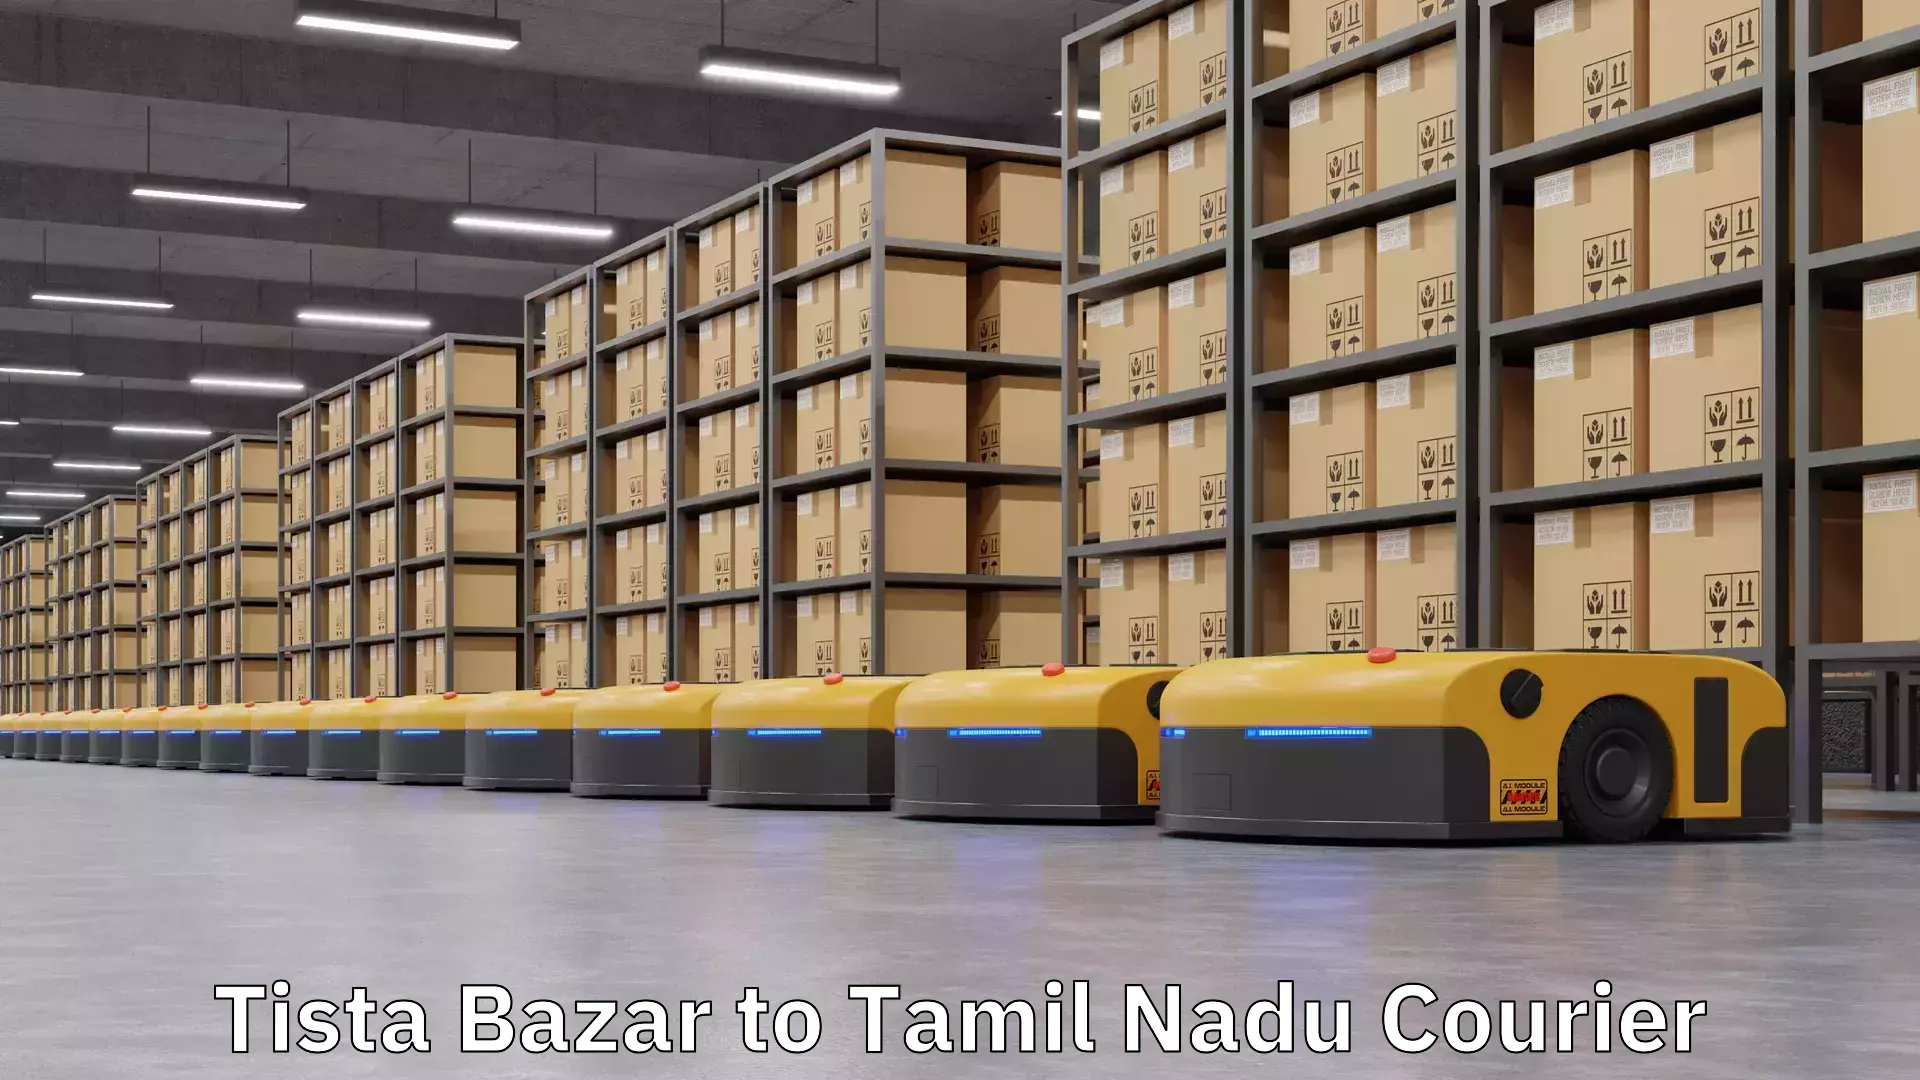 Next-day delivery options in Tista Bazar to Tamil Nadu